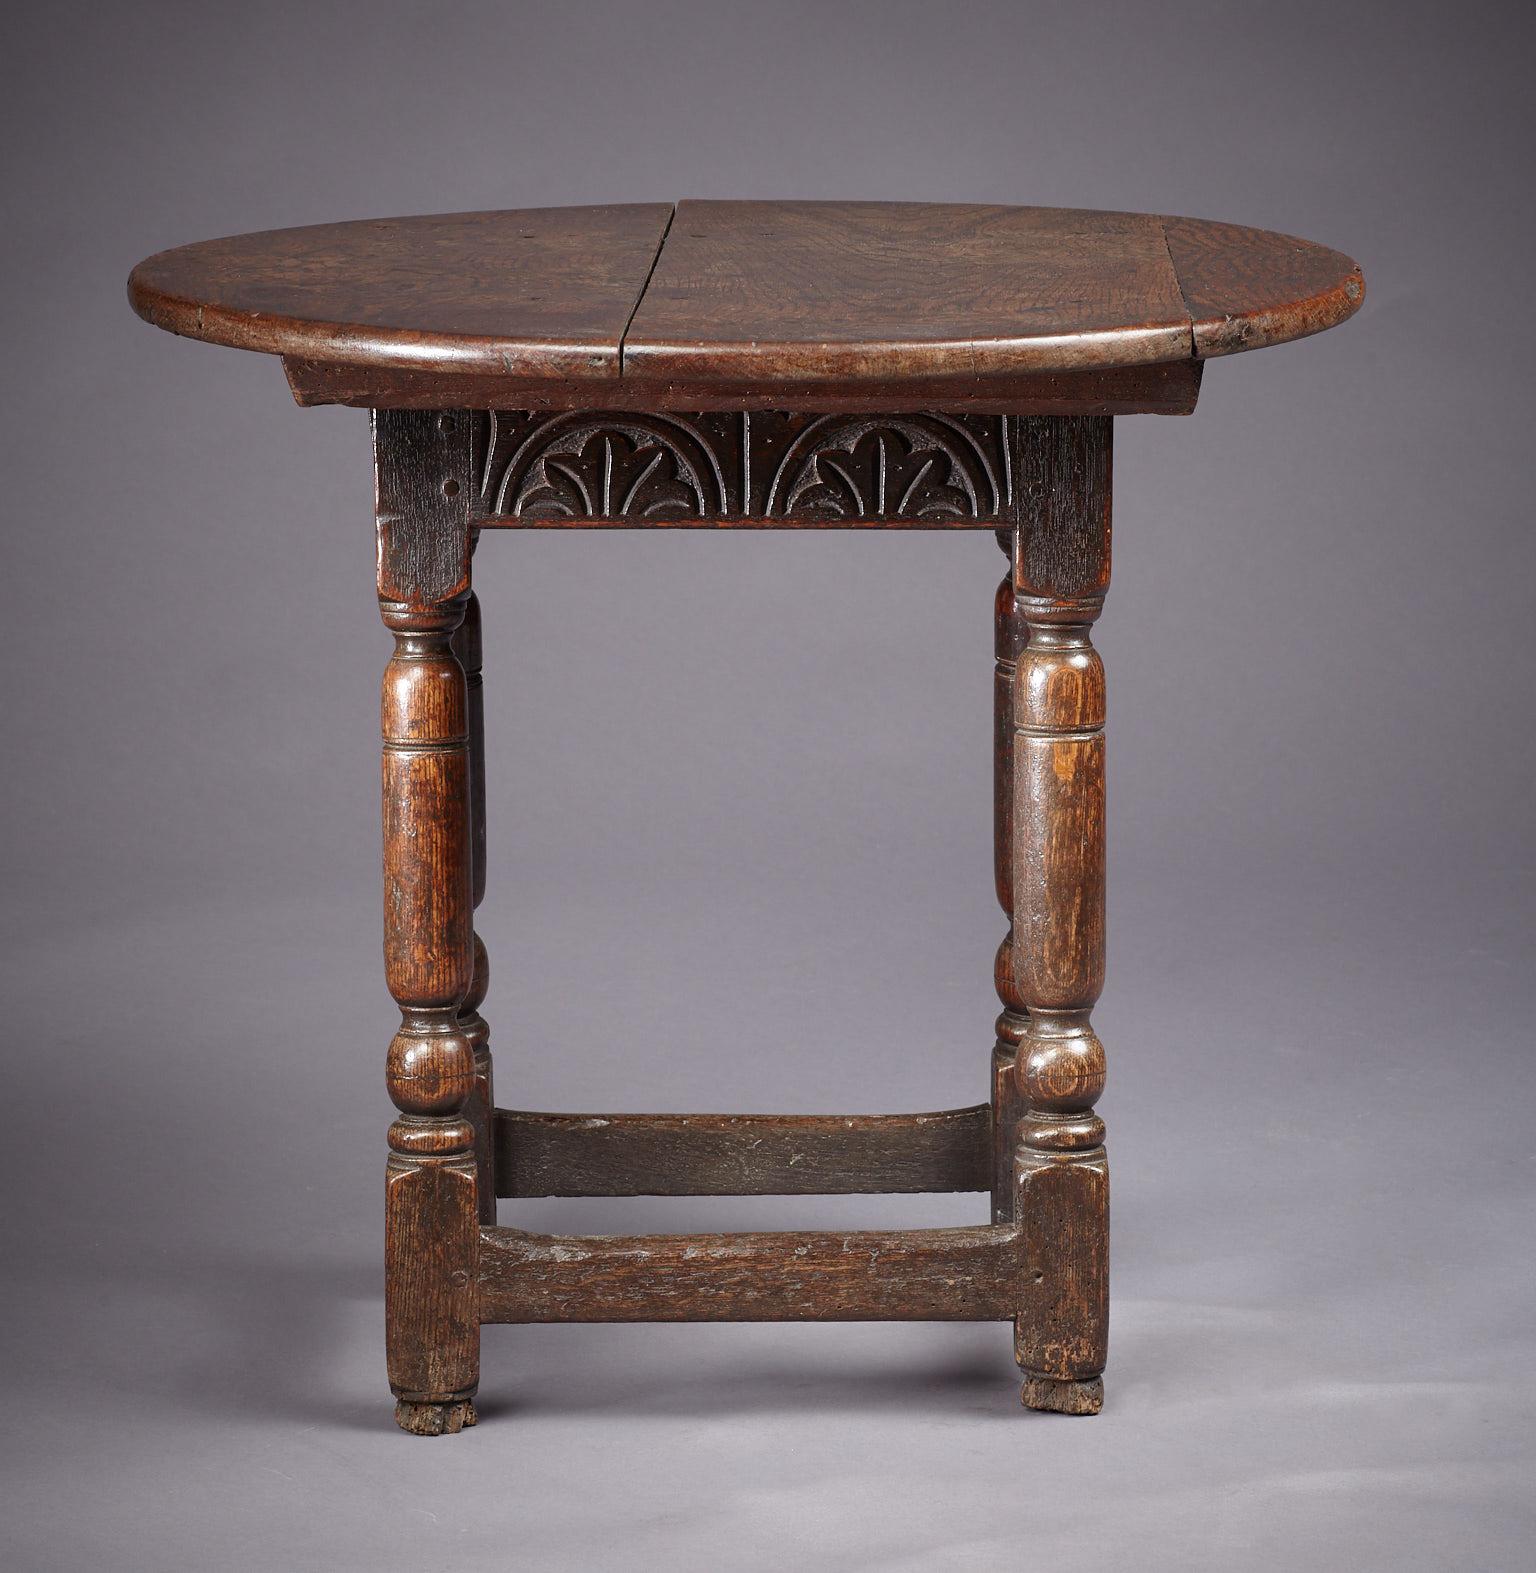 Charles I to Commonwealth period oak joined table stool, with the rare feature of original sliding circular secondary top. The stool base with rectangular top, above lunette carved frieze rails joined by bold baluster and ball turned legs, with